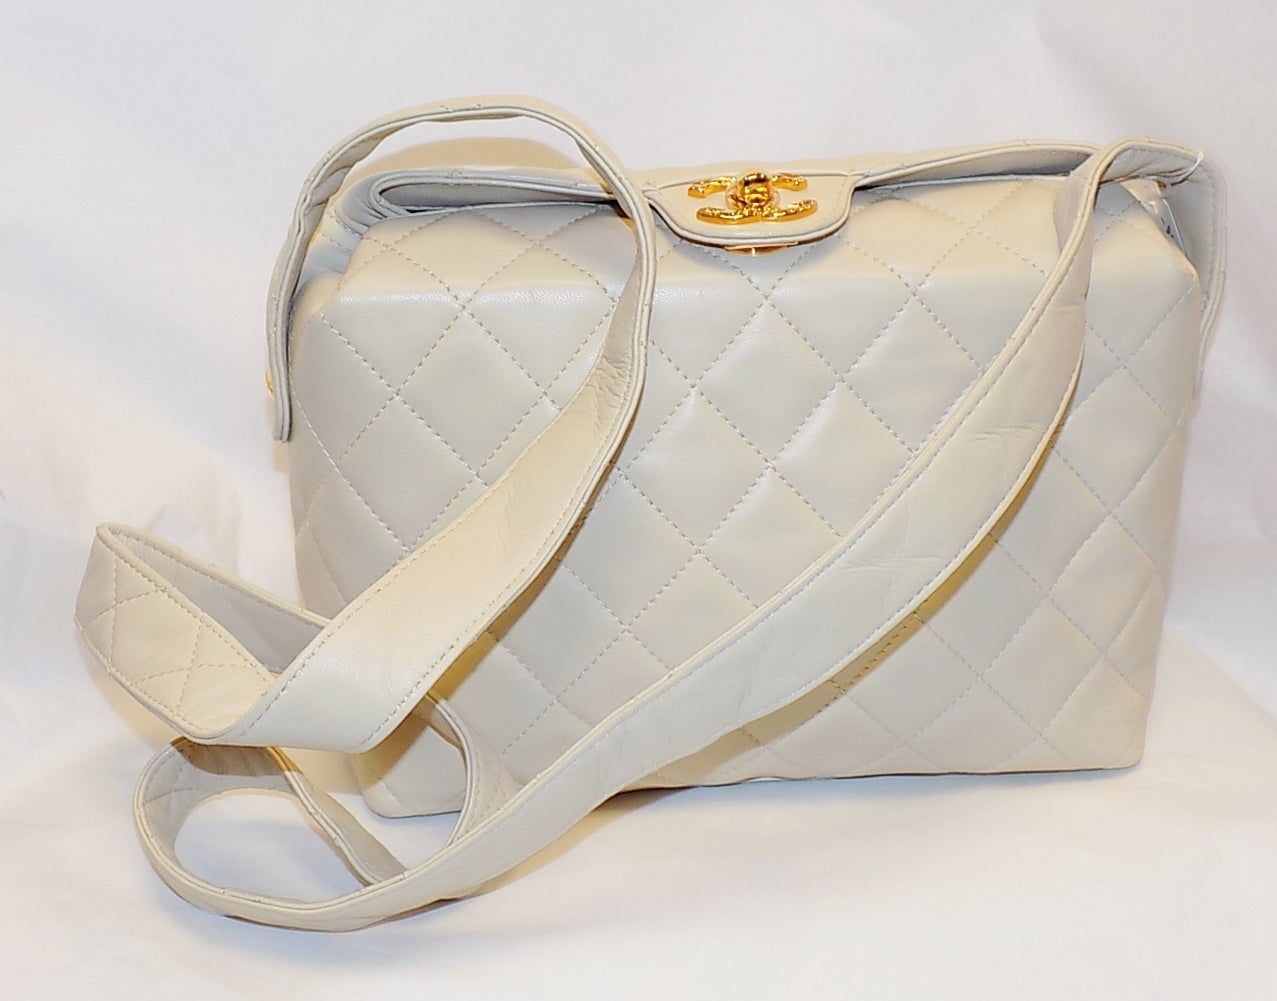 Beautiful lambskin  Chanel  quilted shoulder bag. . Twist  top closure. Perfect size from day to evening.  Gold tone hardware. Bag features one outside pocket and one inside zip pocket.
Pristine condition. No signs of ant wear,  Absolutely clean